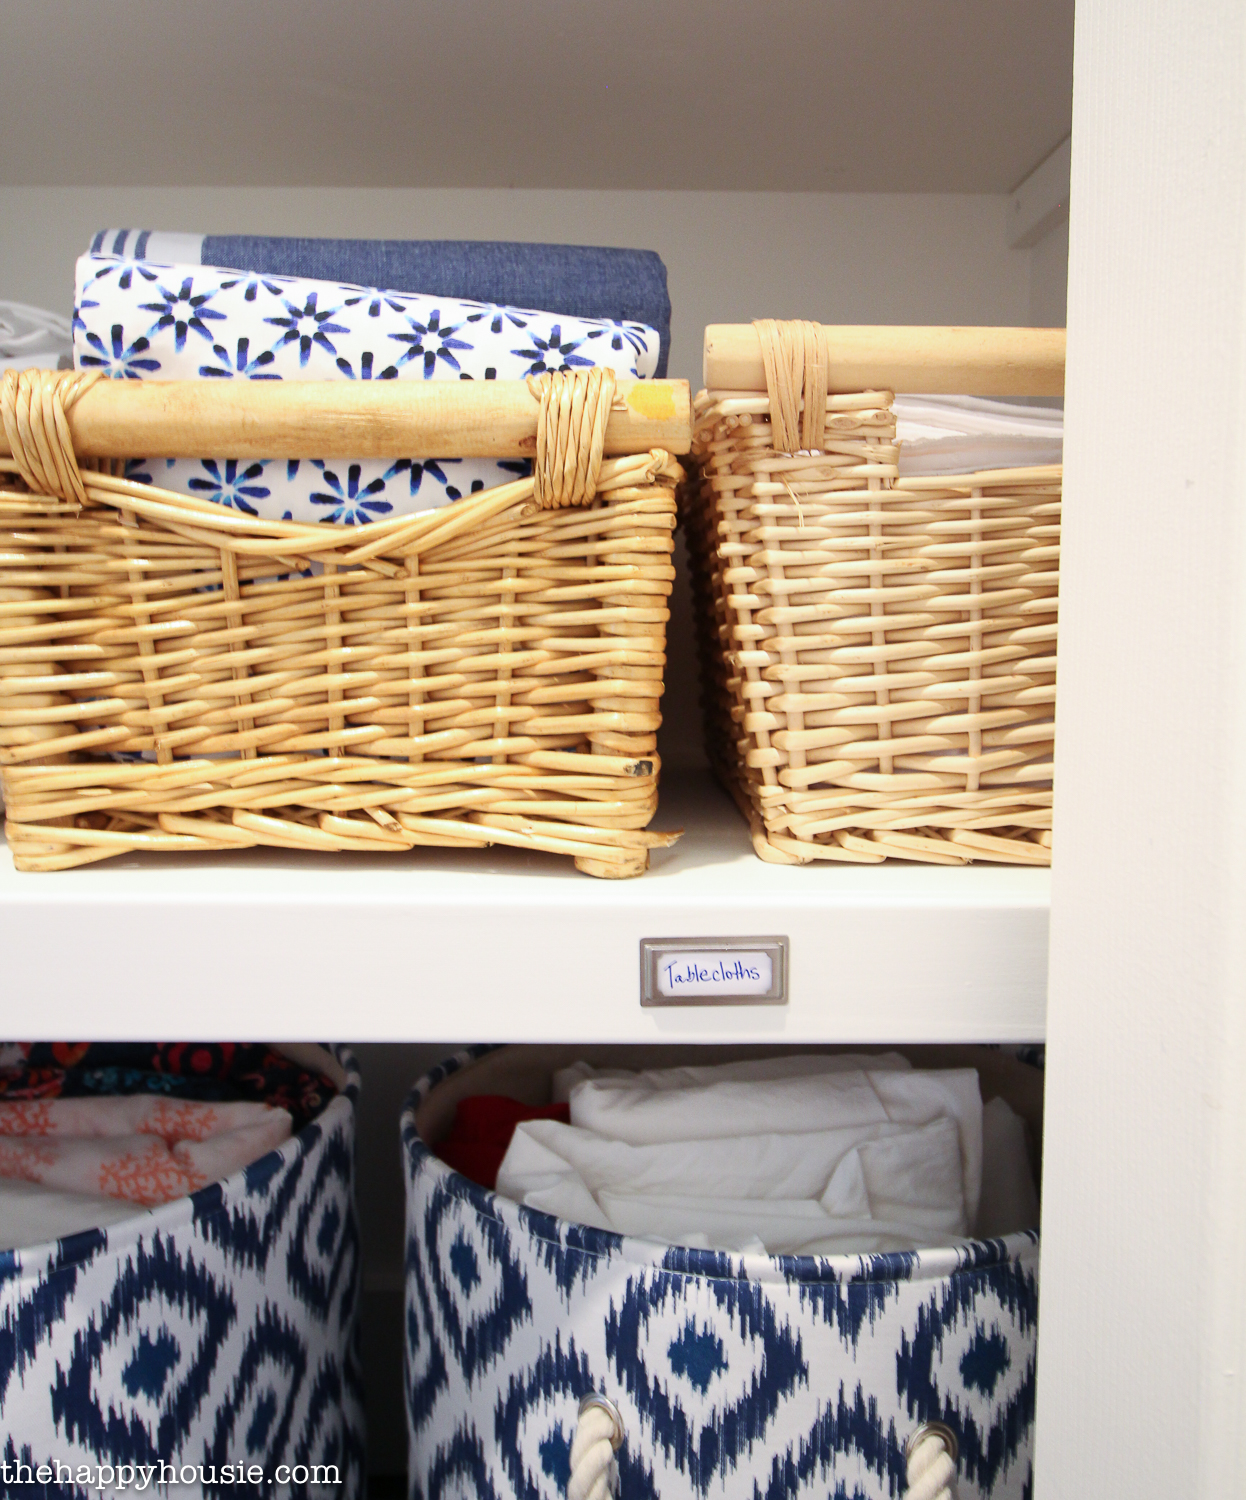 Wicker baskets filled with linen.